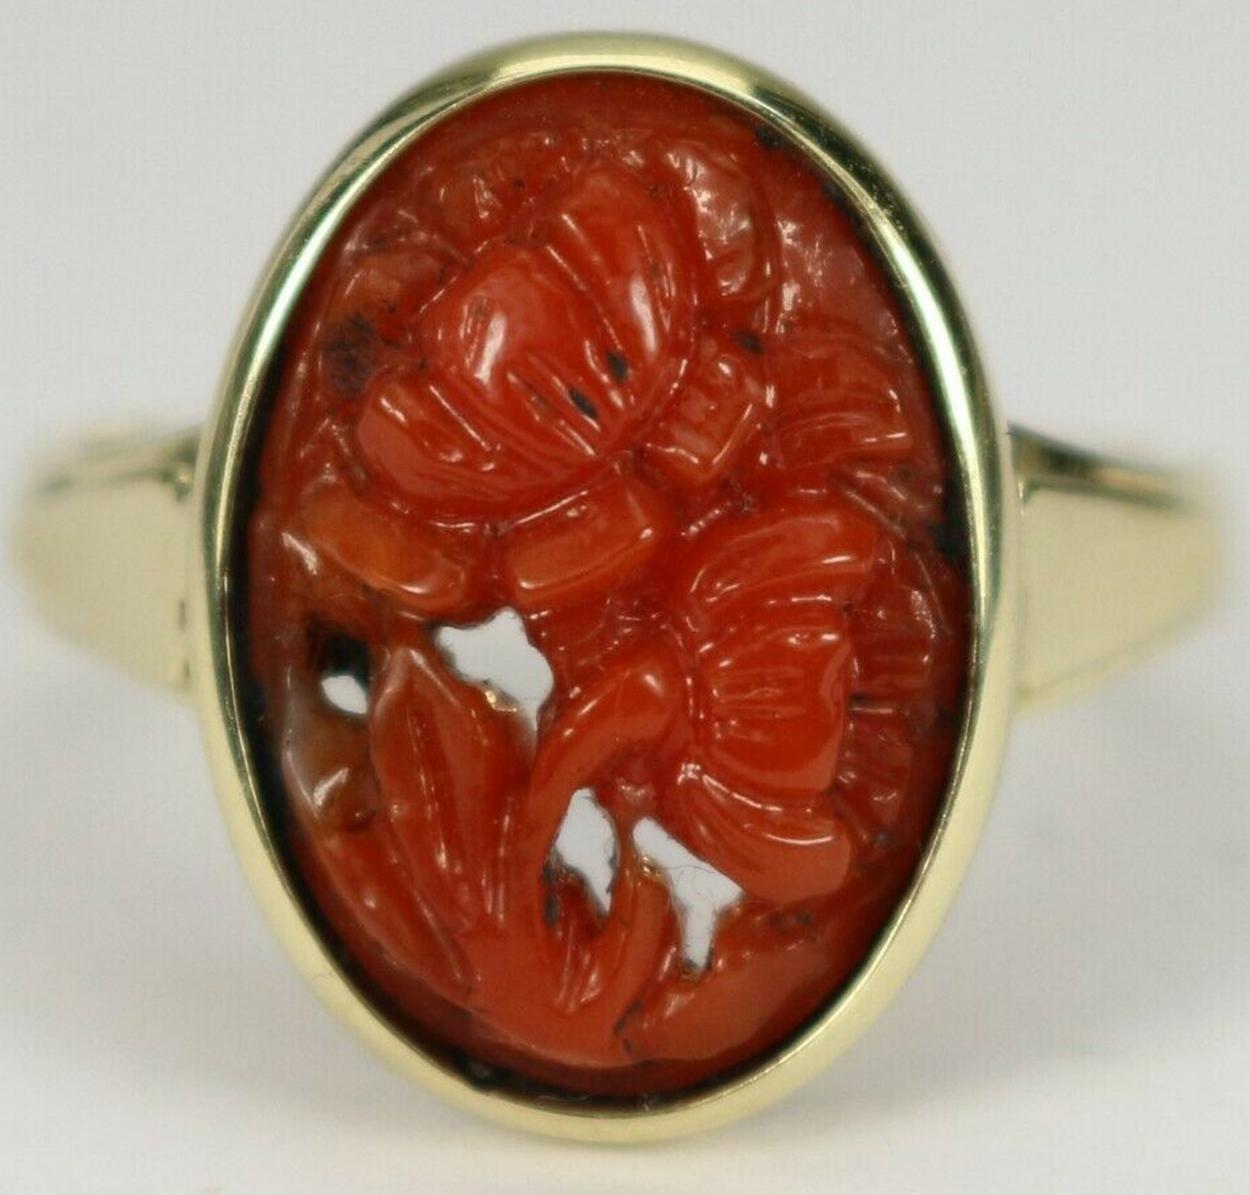 Ring 585 gold carved coral, breakthrough decoration with lotus flowers. A rare, very finely cut coral ring, in some places even delicate breakthroughs can be seen. A breakthrough is not a mistake, but a sign of excellent fine craftsmanship!

Ring